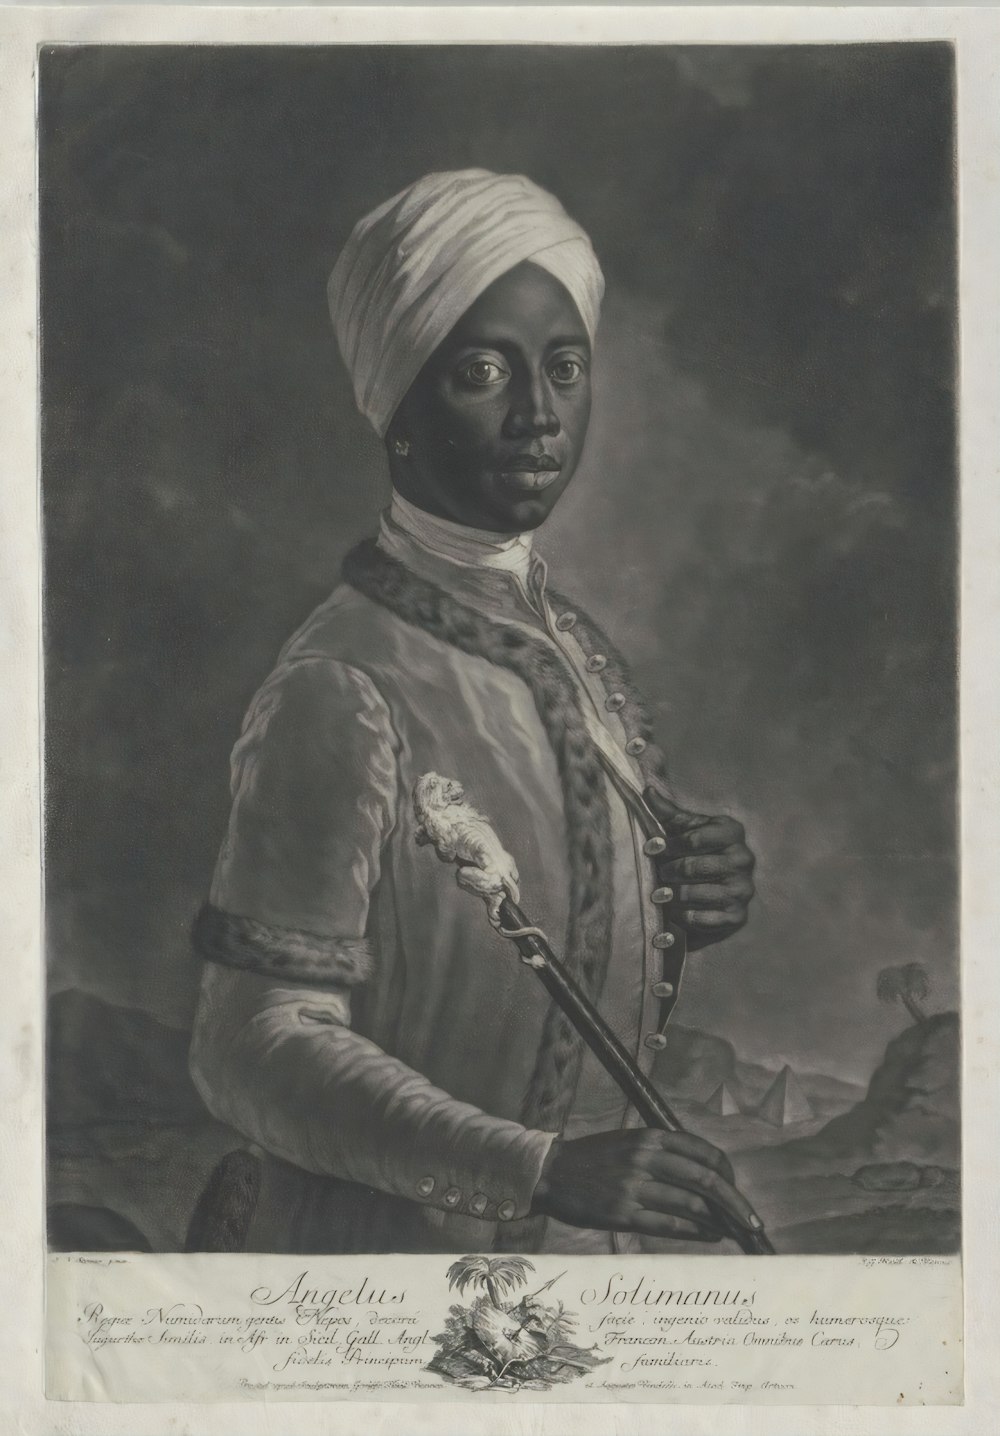 a black and white photo of a man in a turban